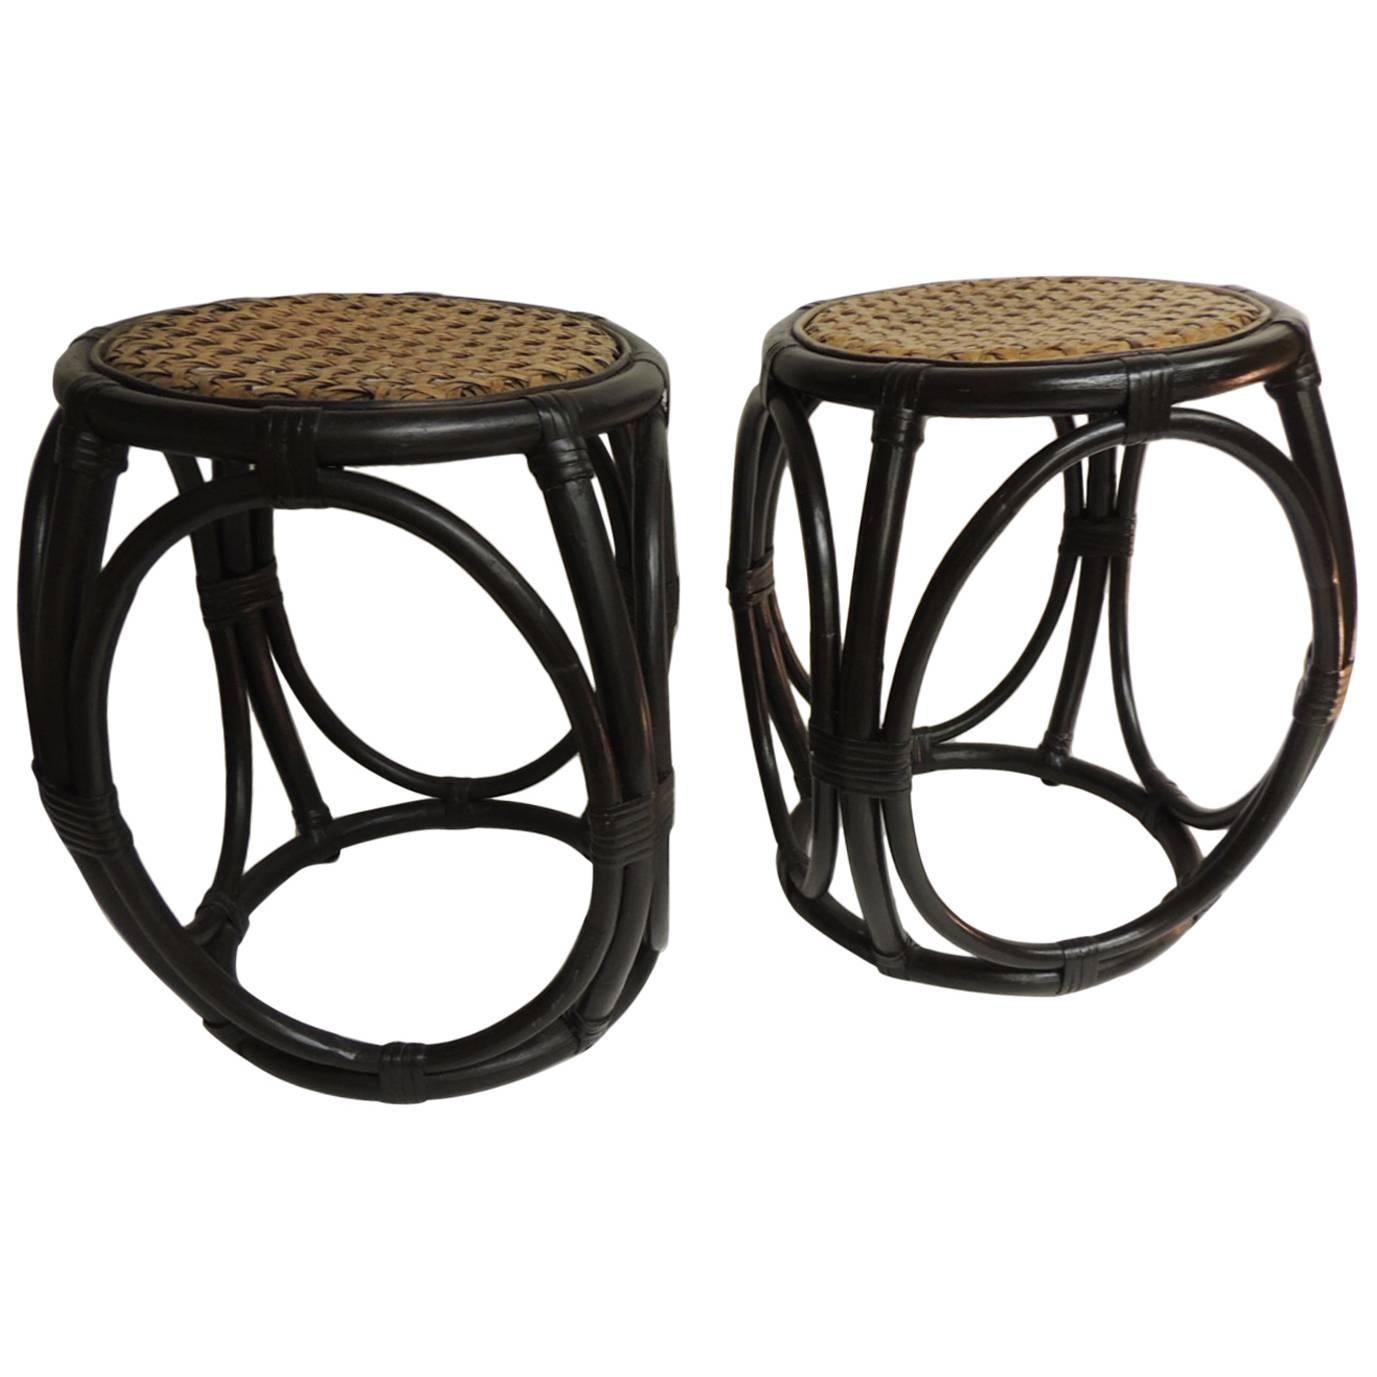 HOLIDAY SALE: Pair of Vintage Bentwood Thonet Style Stools with Wicker Seats